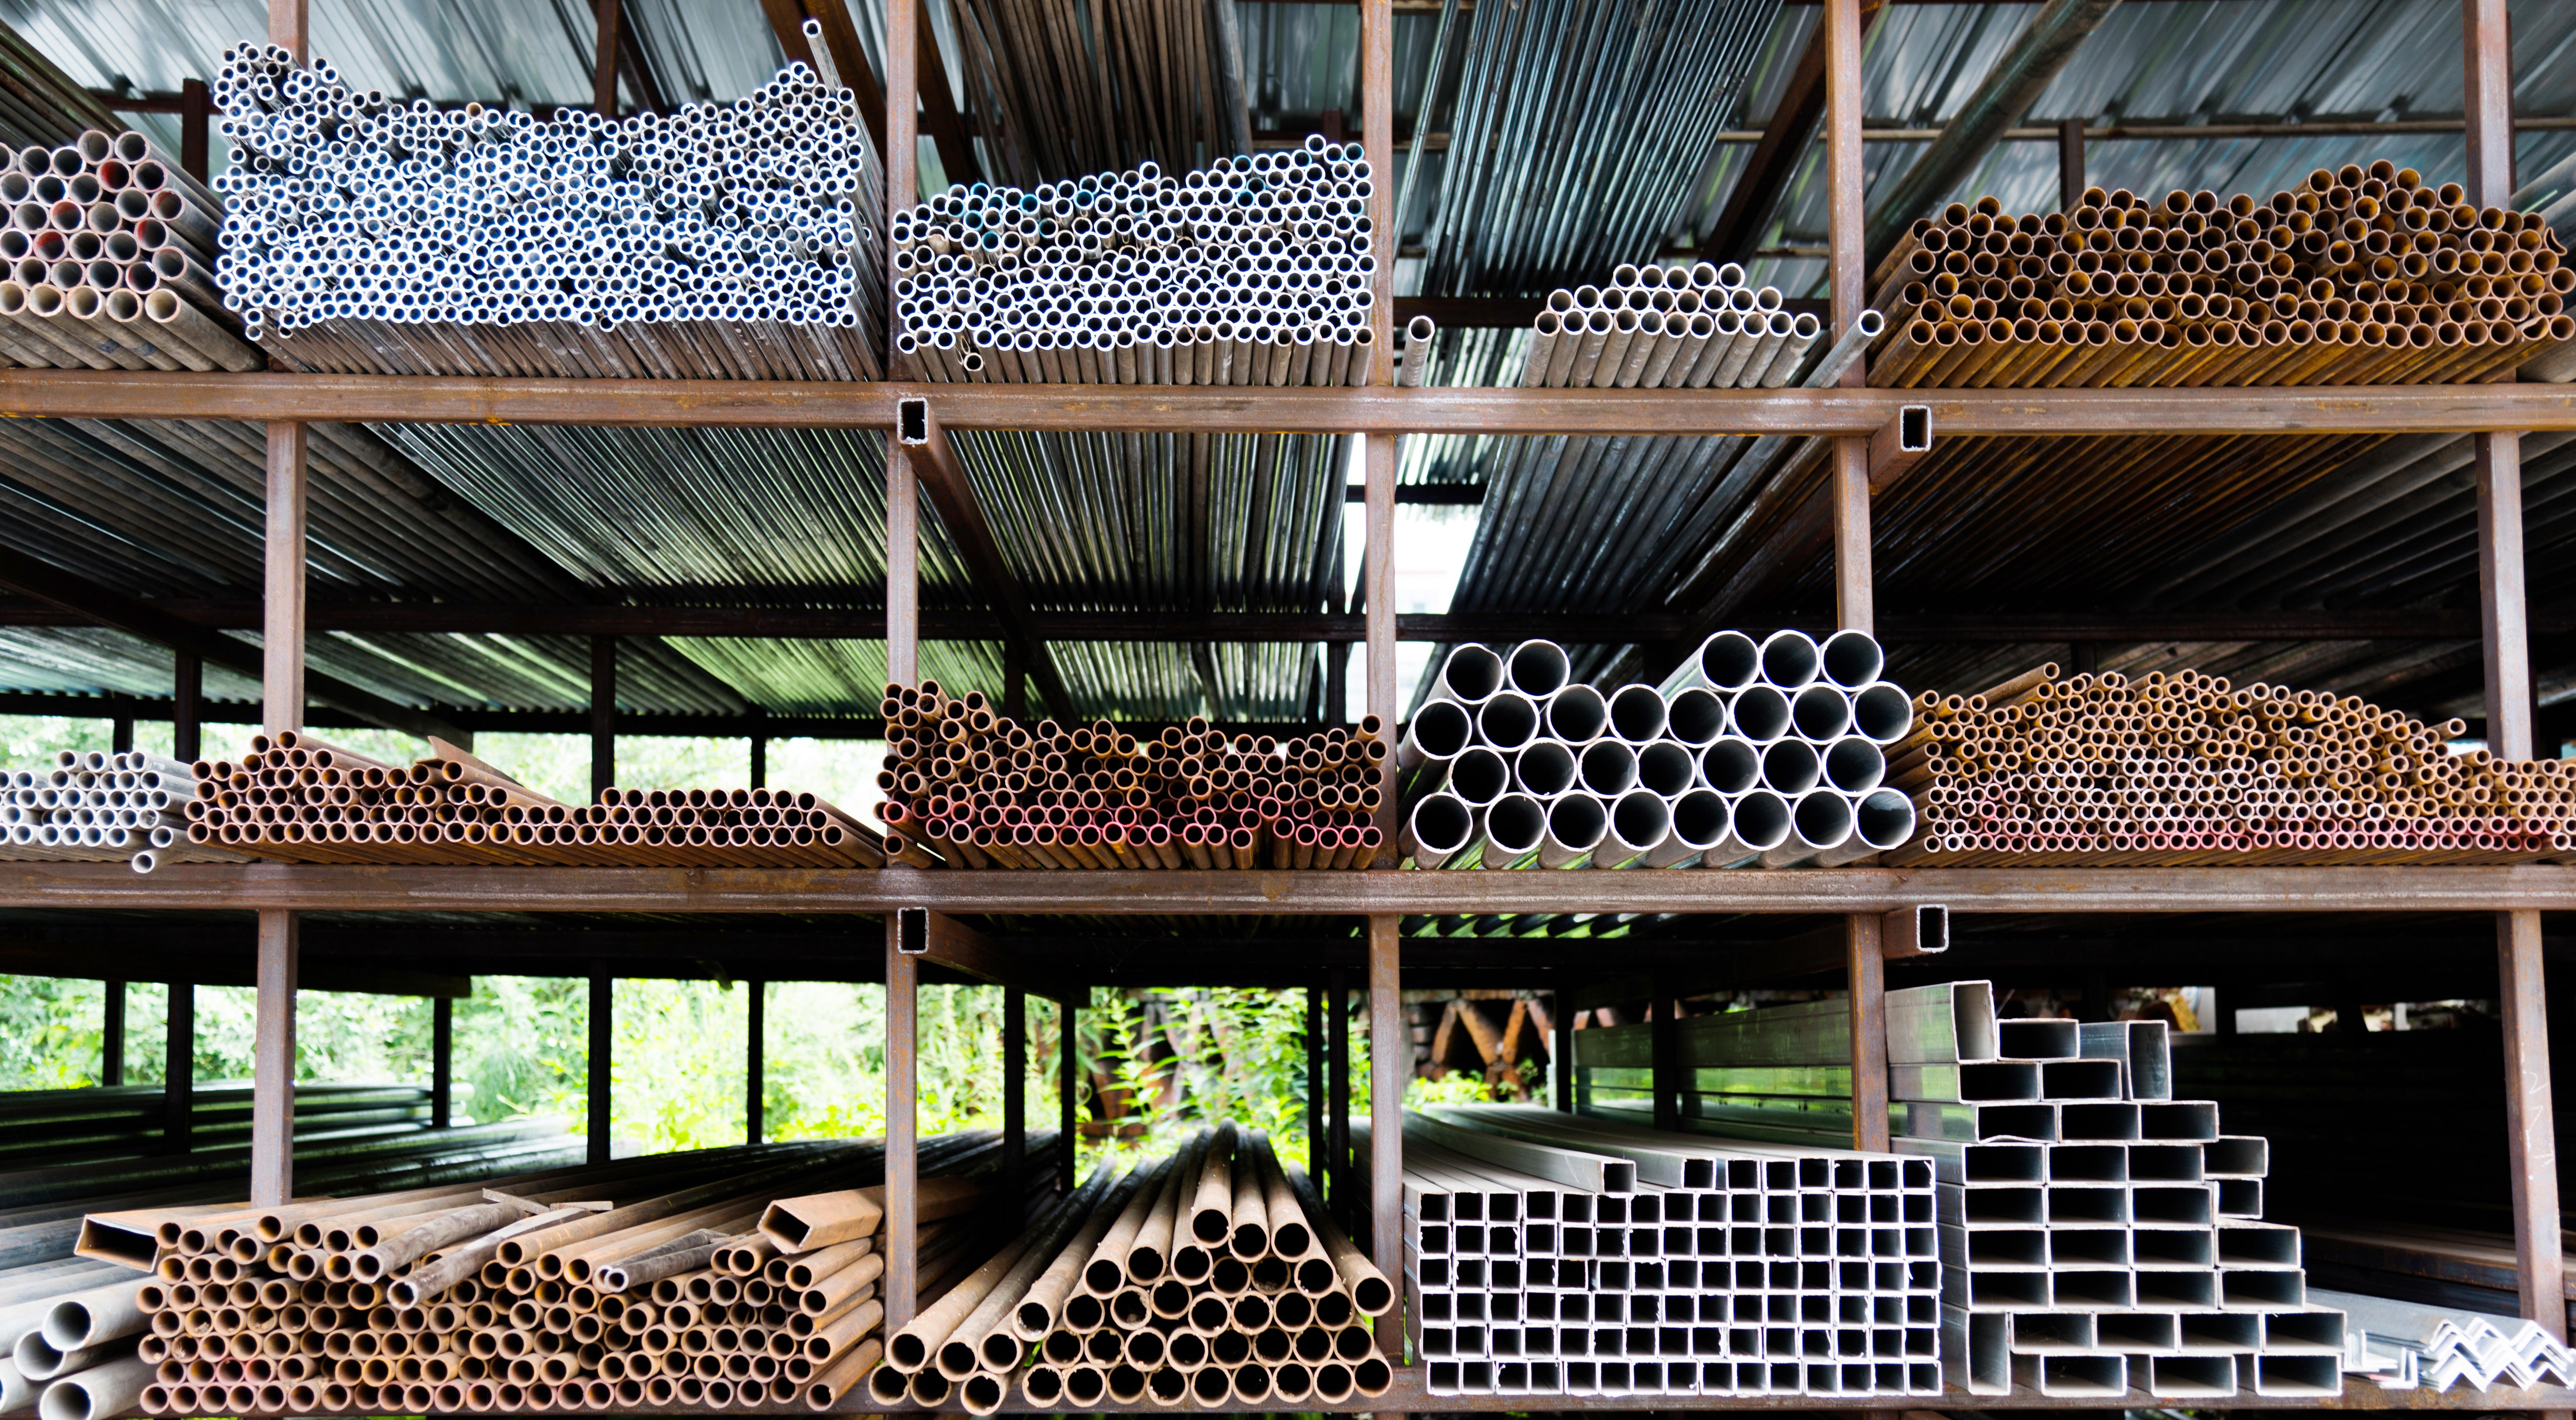 Different sizes of steel tubes on a stock shelf.